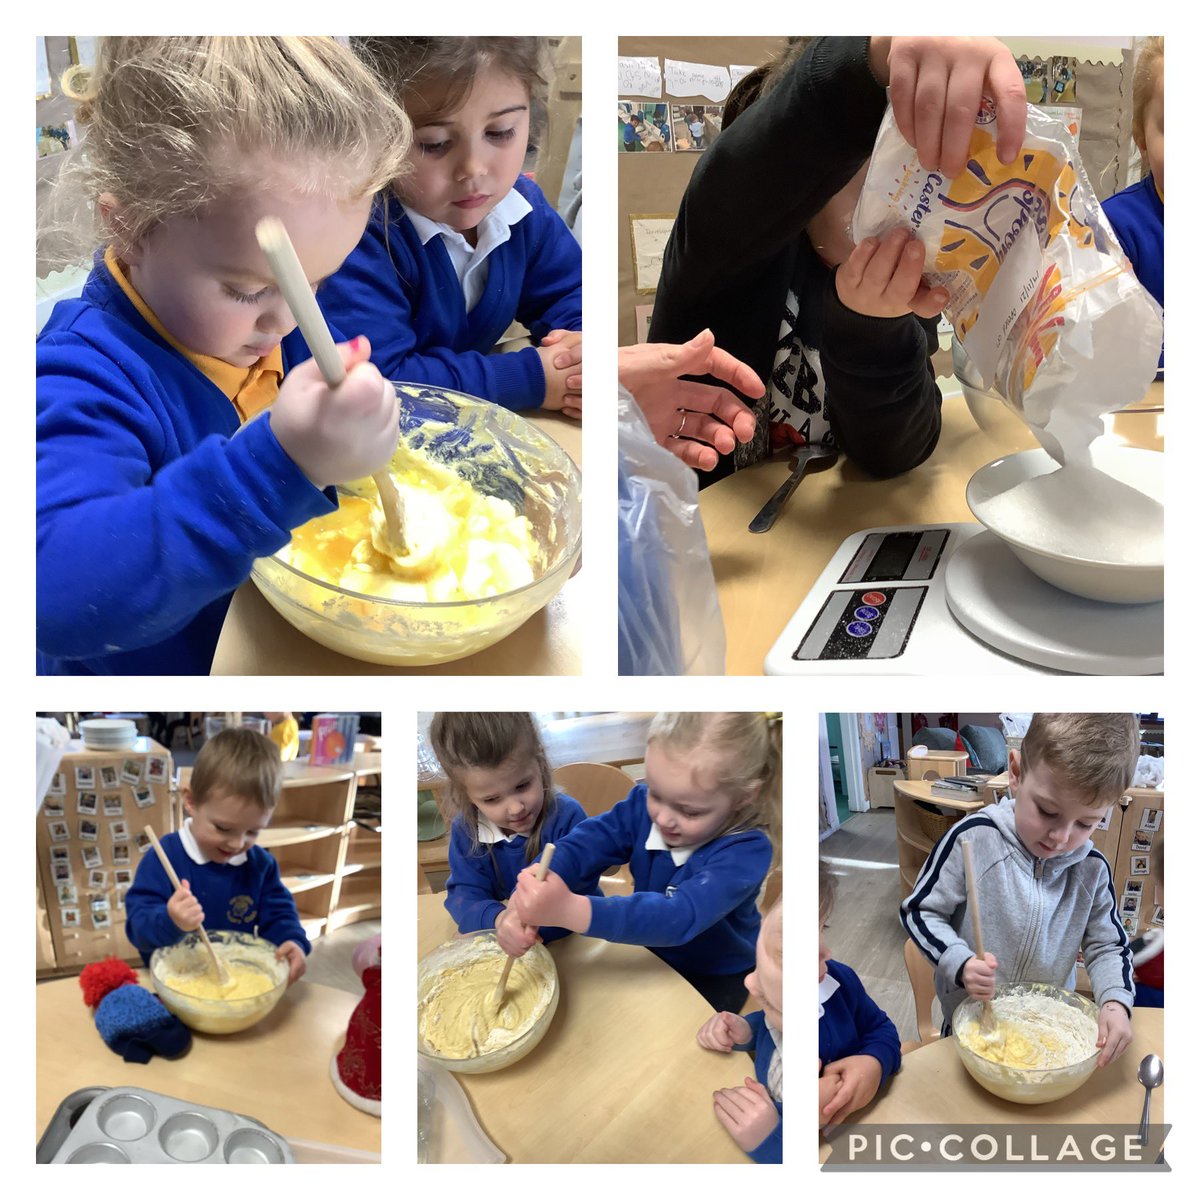 Some of our children asked to bake Christmas cakes this morning. We measured out how much flour and sugar we would need. “Let’s make Christmas cakes because we are decorating the nursery for Christmas” S told me. @victorianurclas #earlynumeracy #confidentindividuals